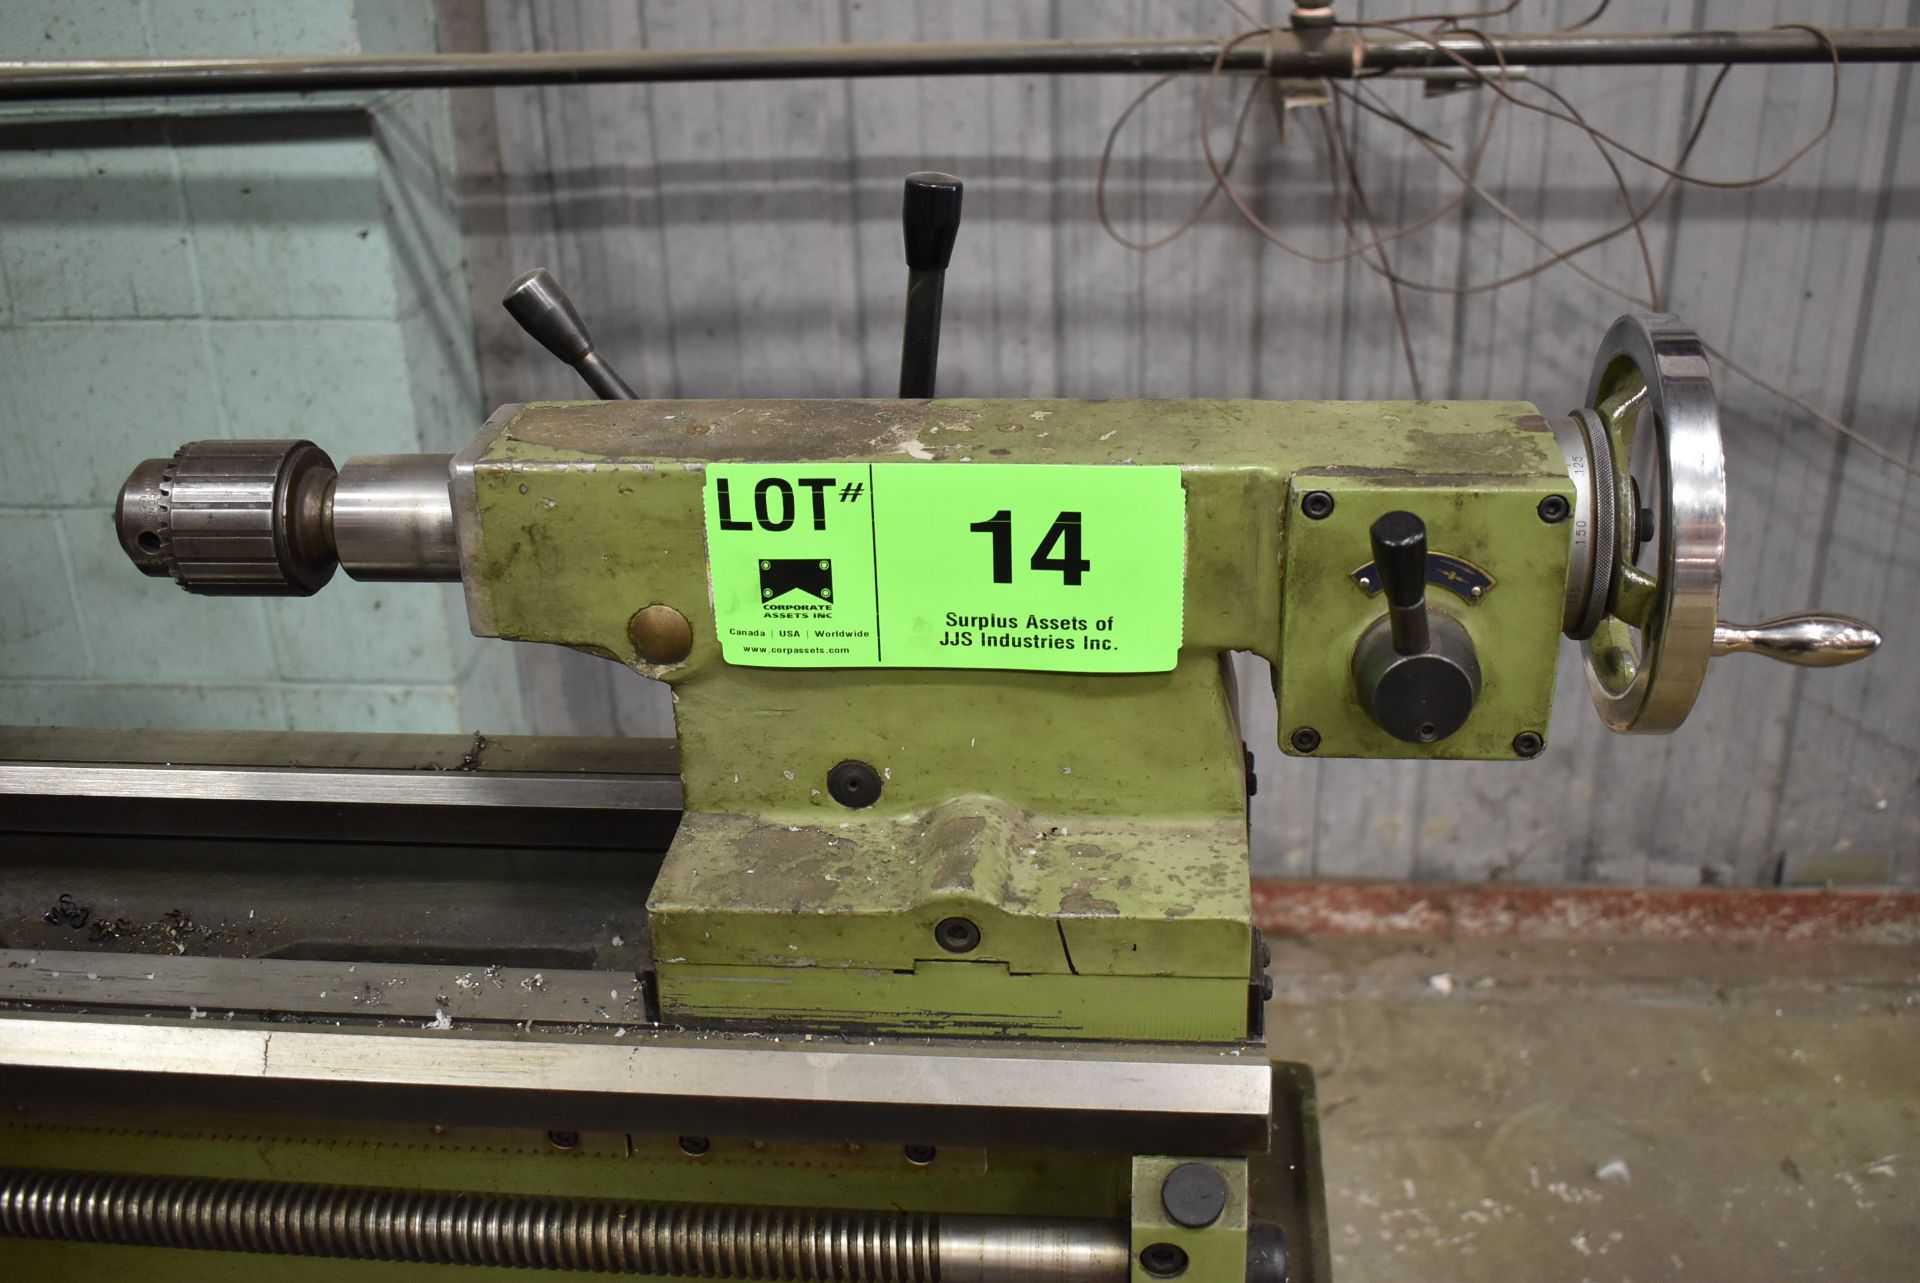 YAM YAM-10000 GAP BED ENGINE LATHE WITH 16" SWING OVER BED, 38" BETWEEN CENTERS, 1-3/4" BORE SIZE, - Image 7 of 9